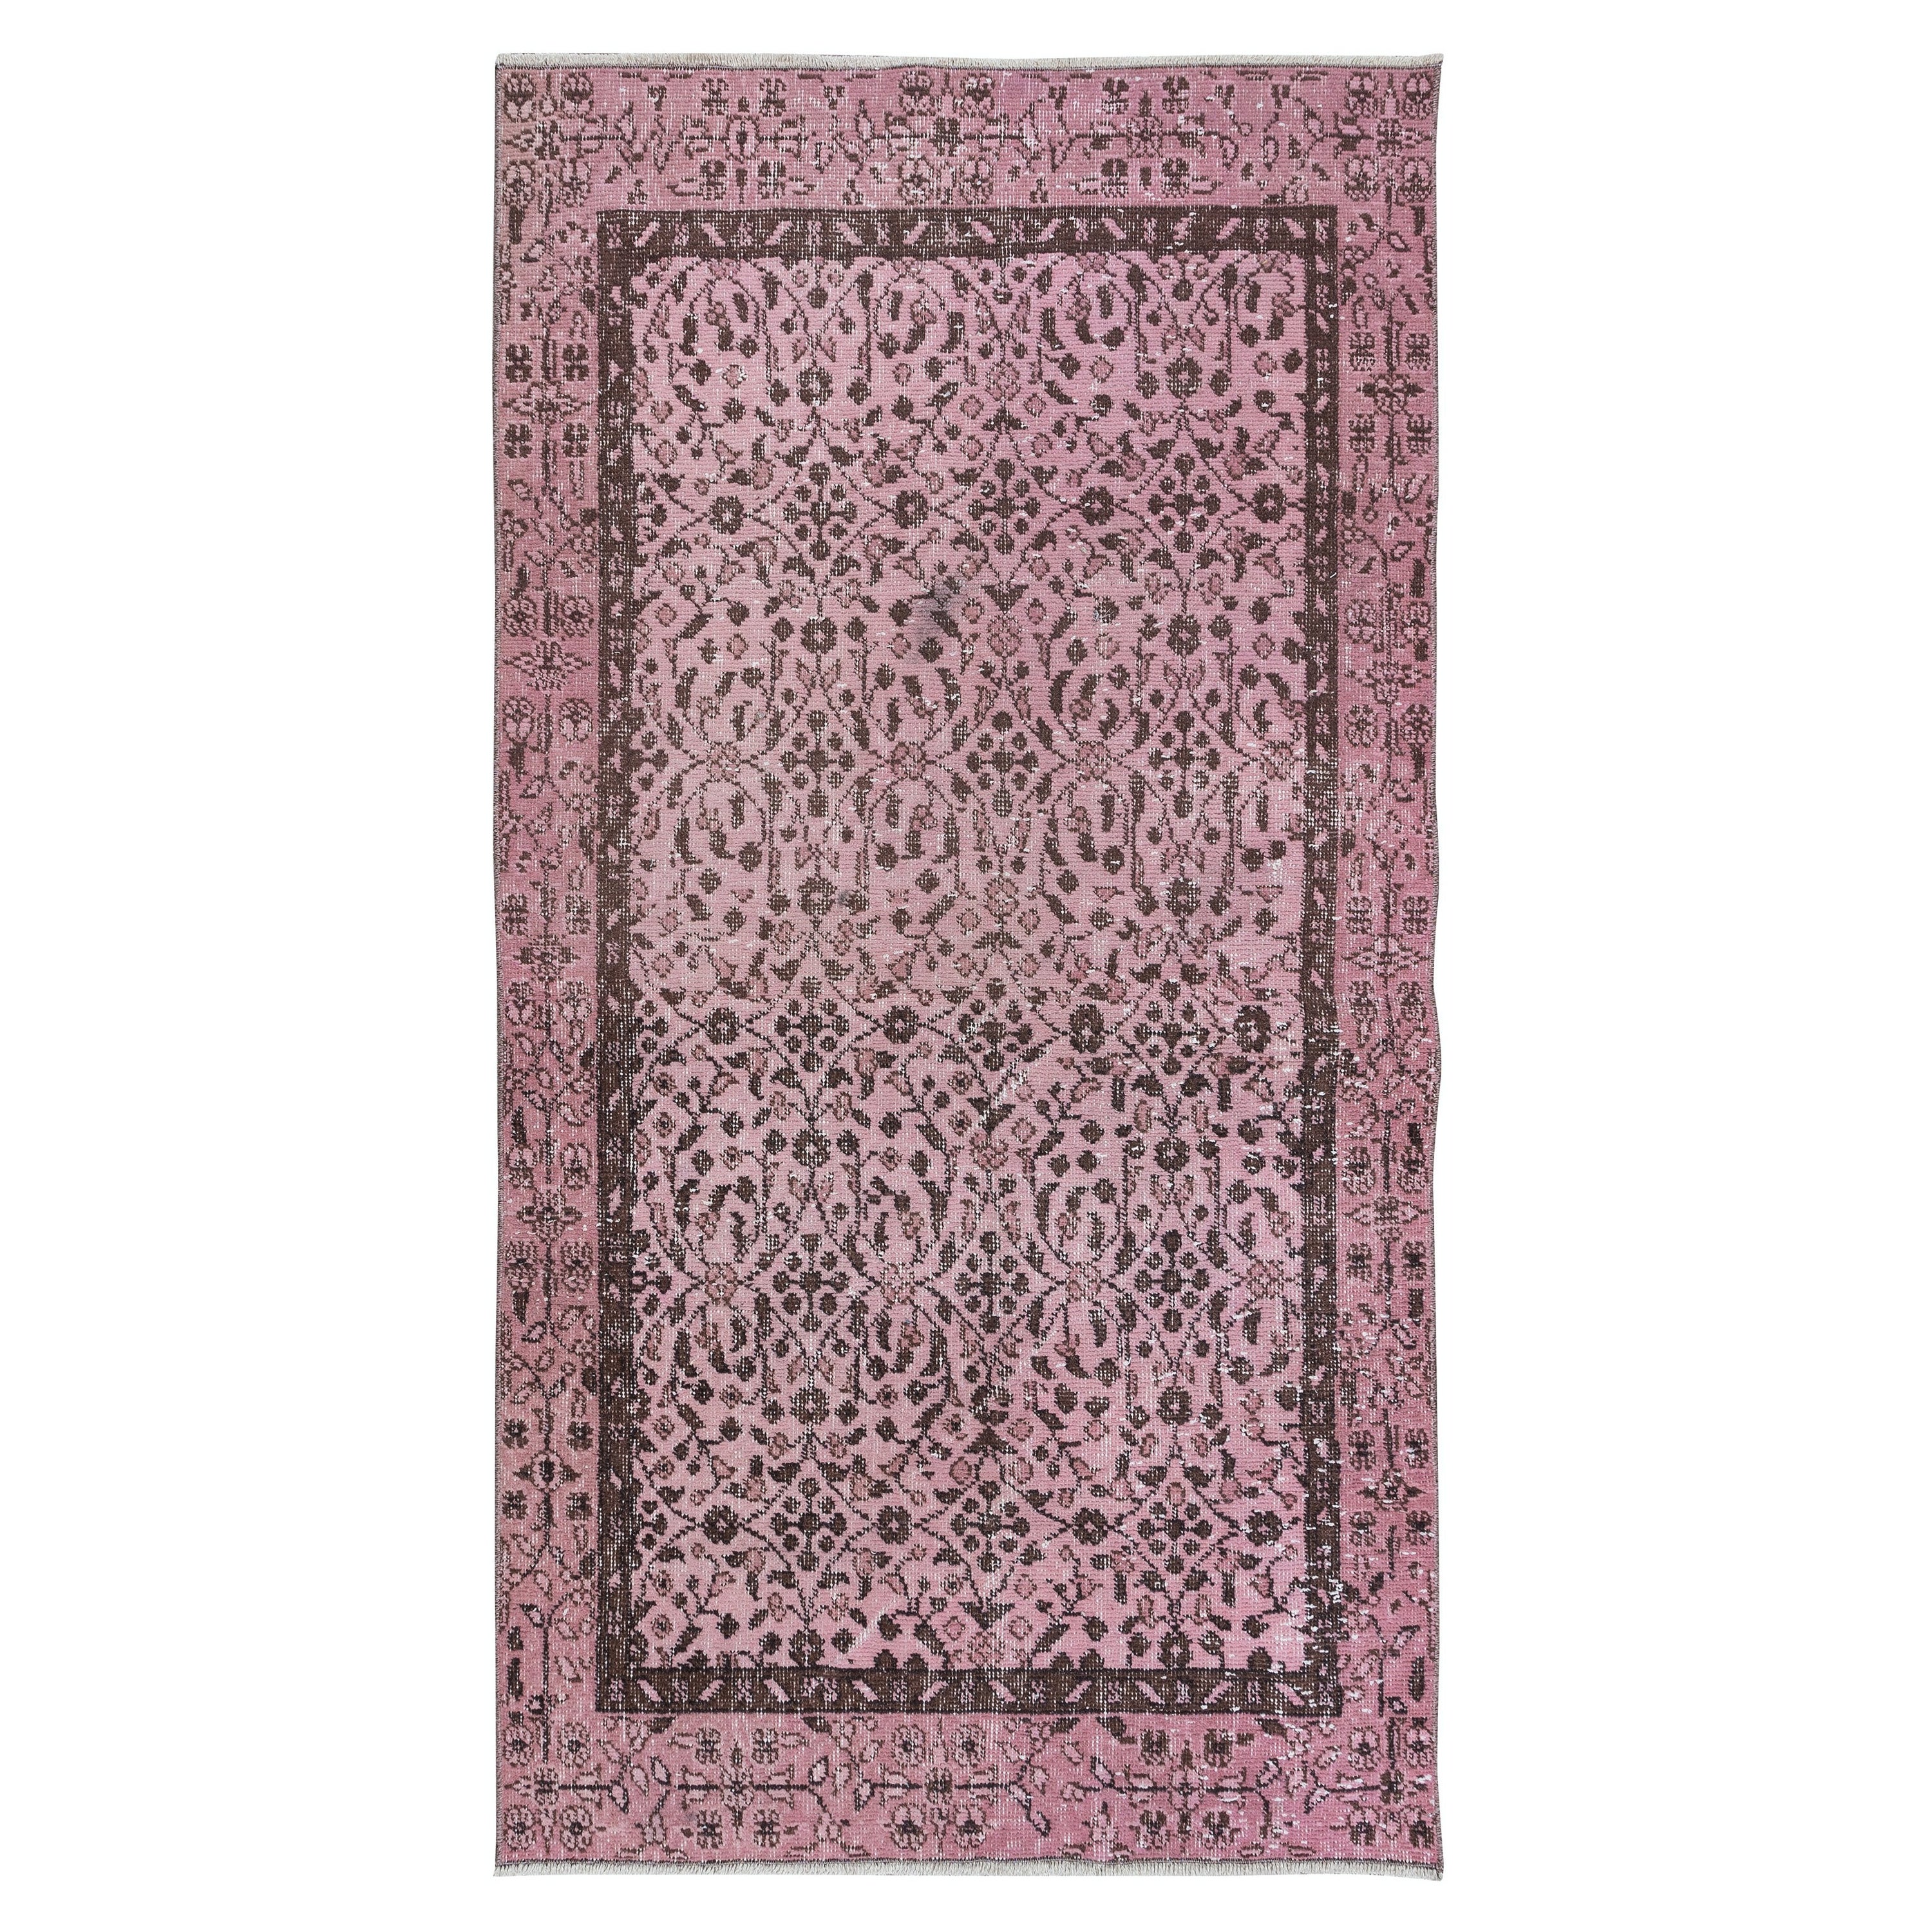 3.5x6.5 Ft Light Pink Handmade Turkish Small Rug, Floral Pattern Floor Covering For Sale